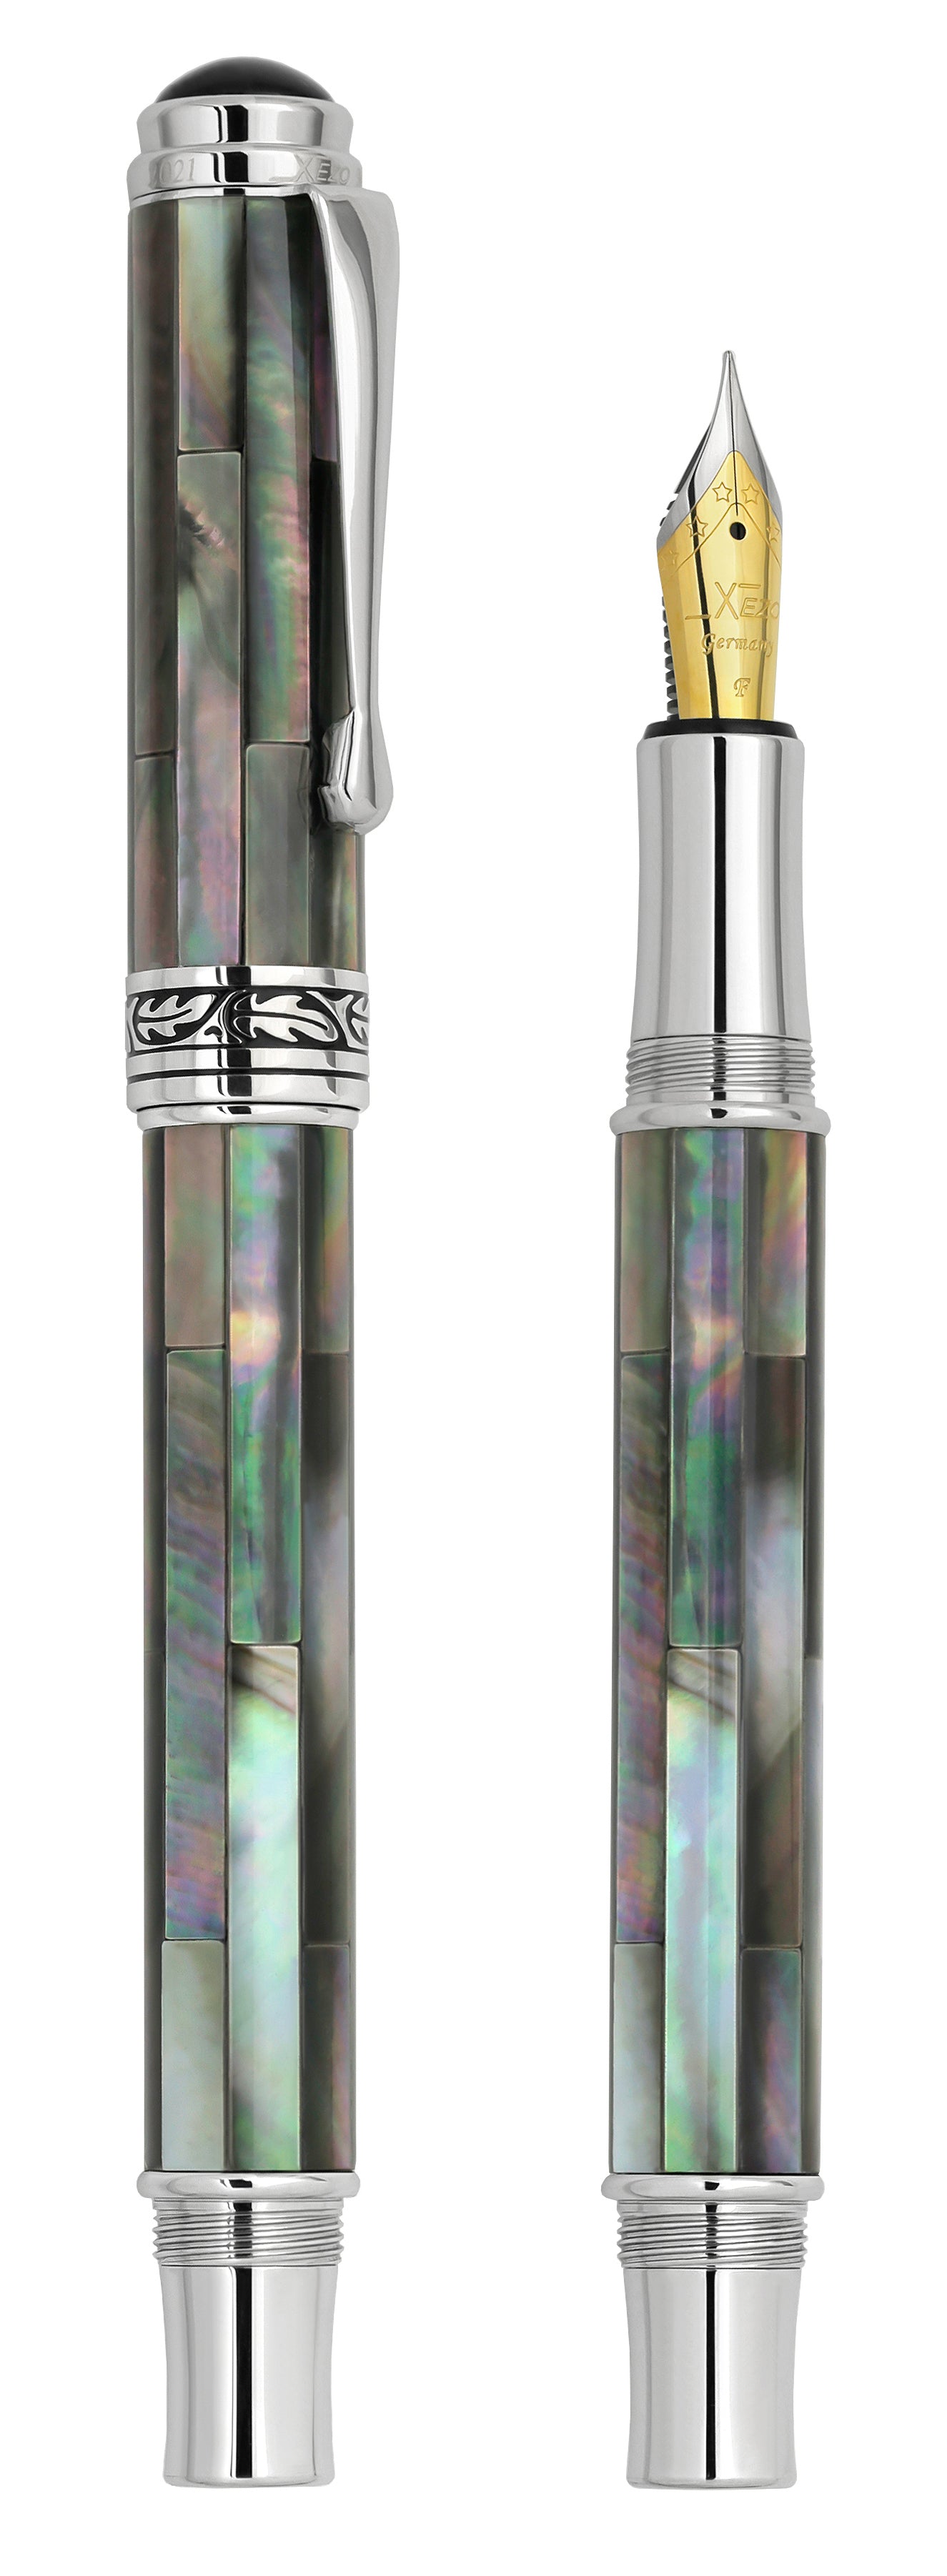 Xezo - Vertical view of two Maestro Black Mother of Pearl FBP-2 pens. The pen on the left is capped, and the pen on the right has no cap